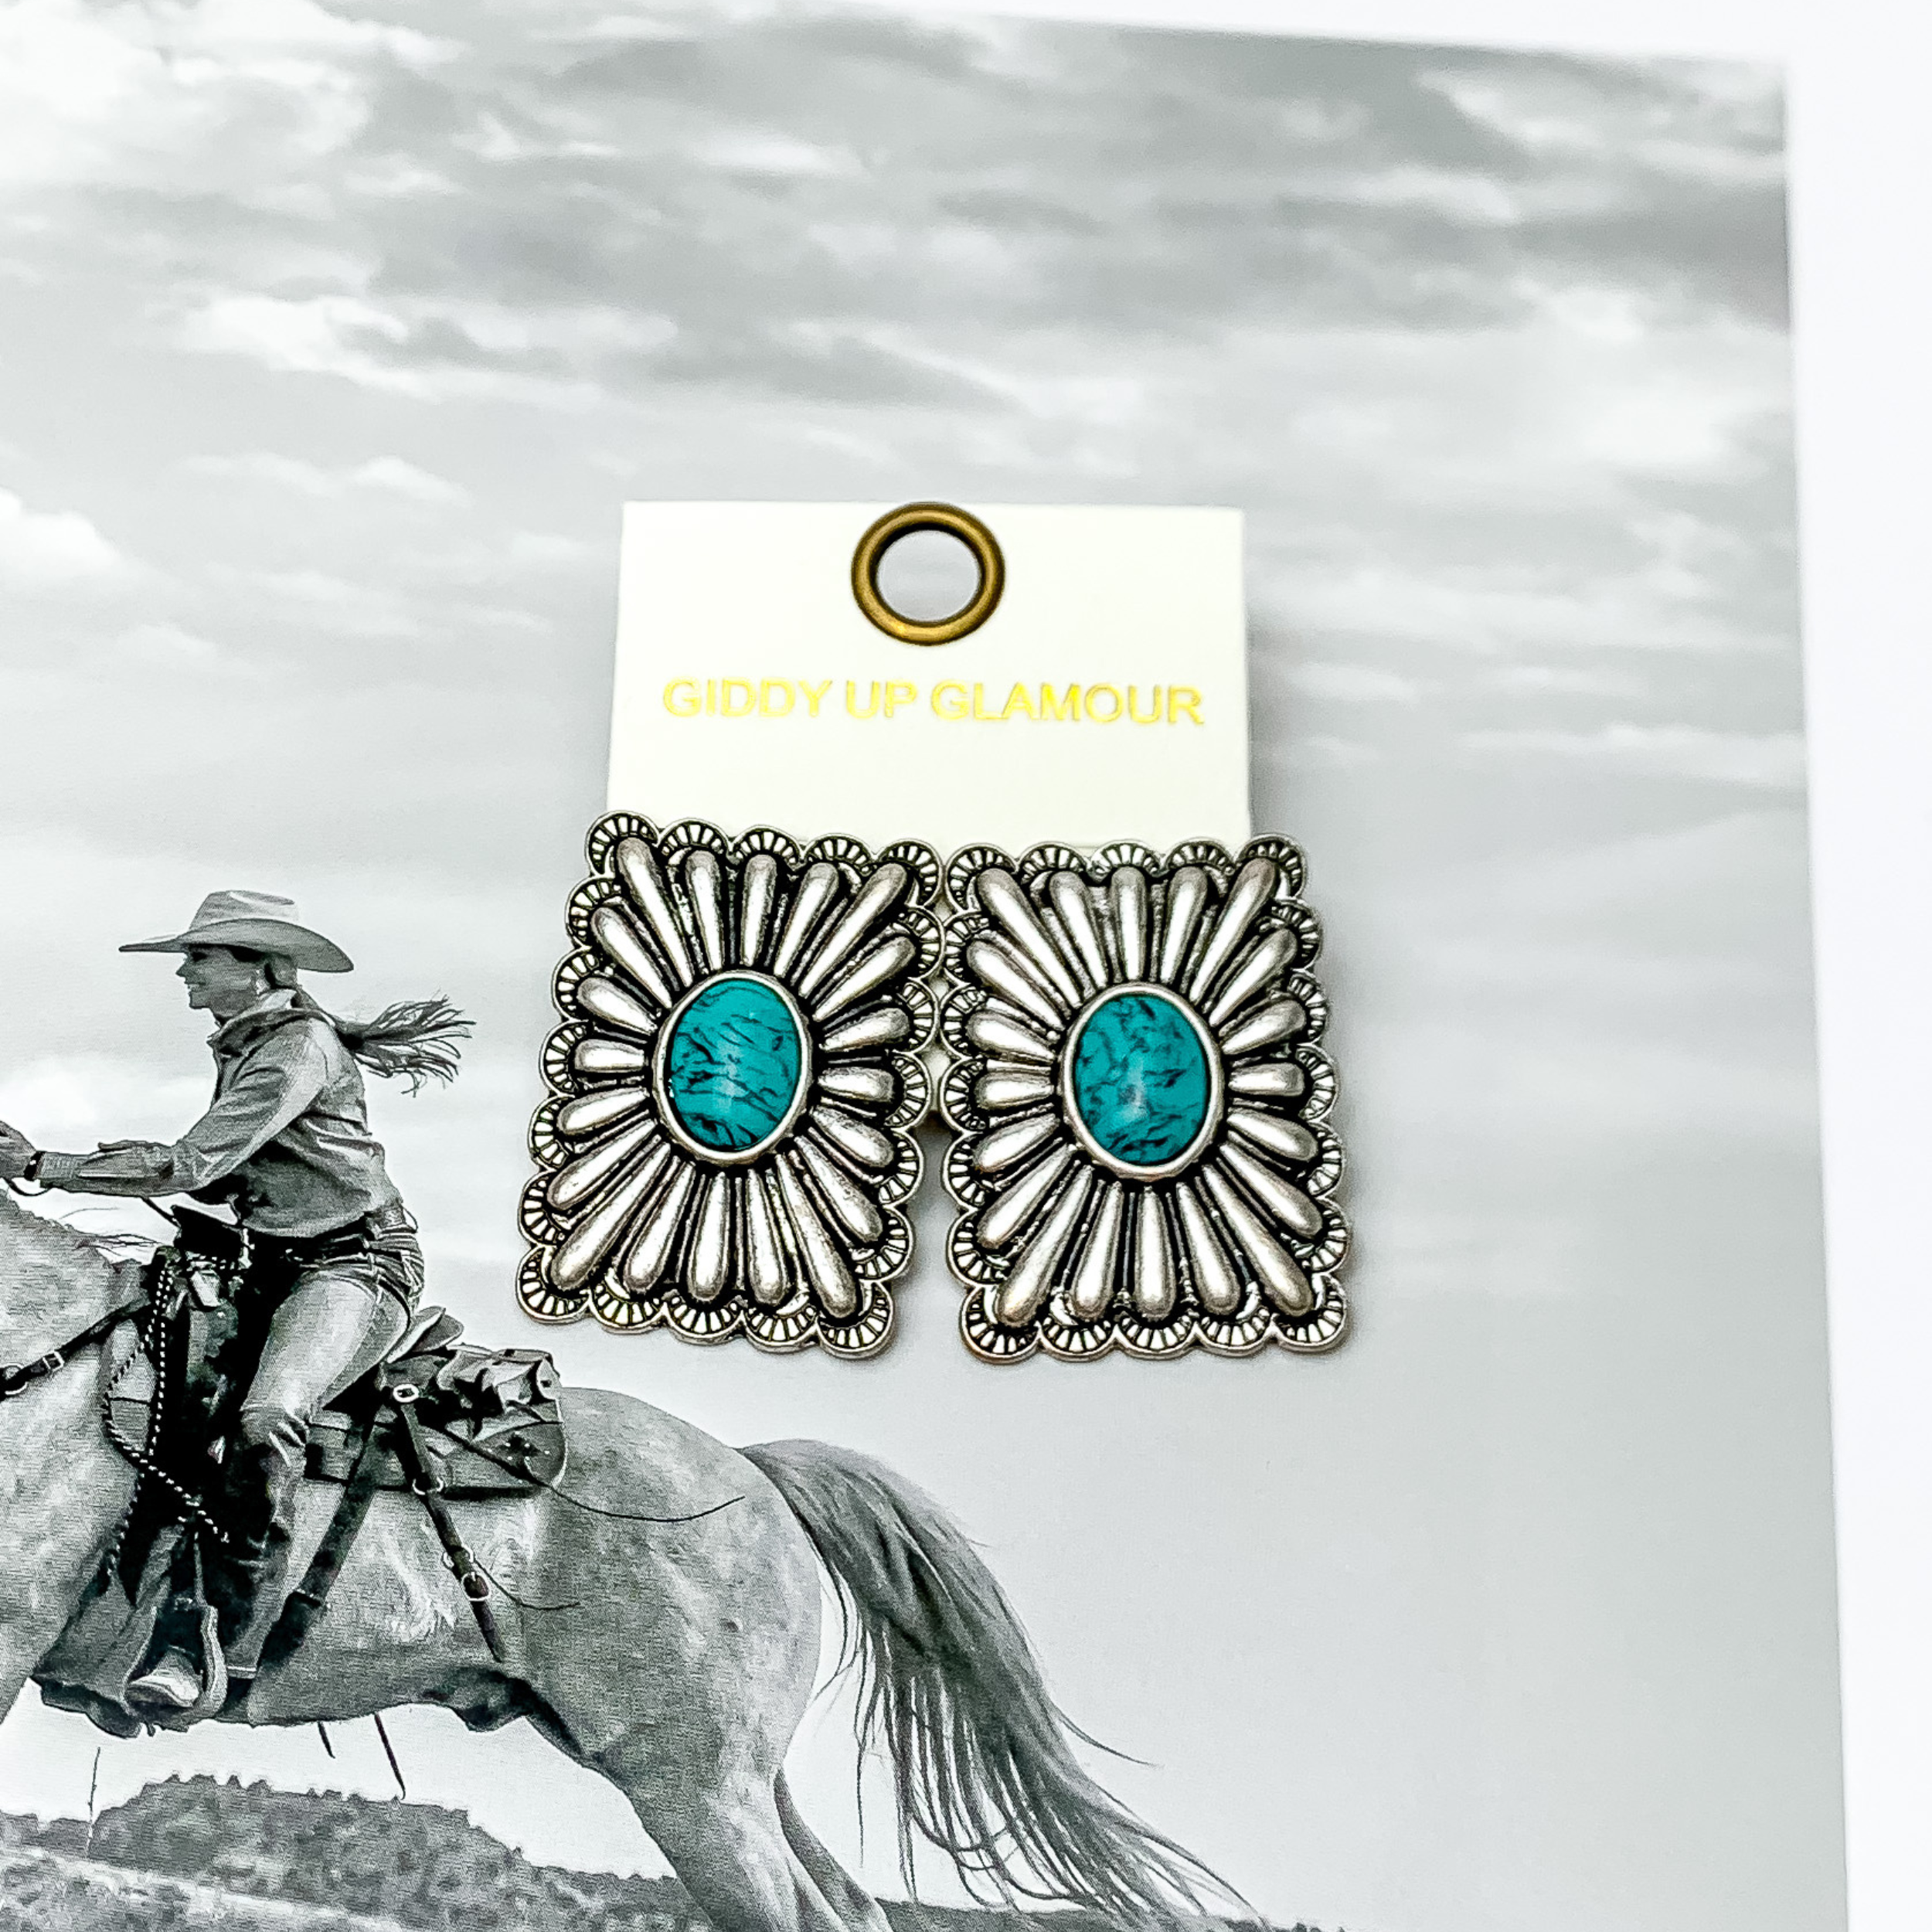 Western Flare Silver Tone Rectangle Earrings With Stone in Turquoise. Pictured on a western scene background.